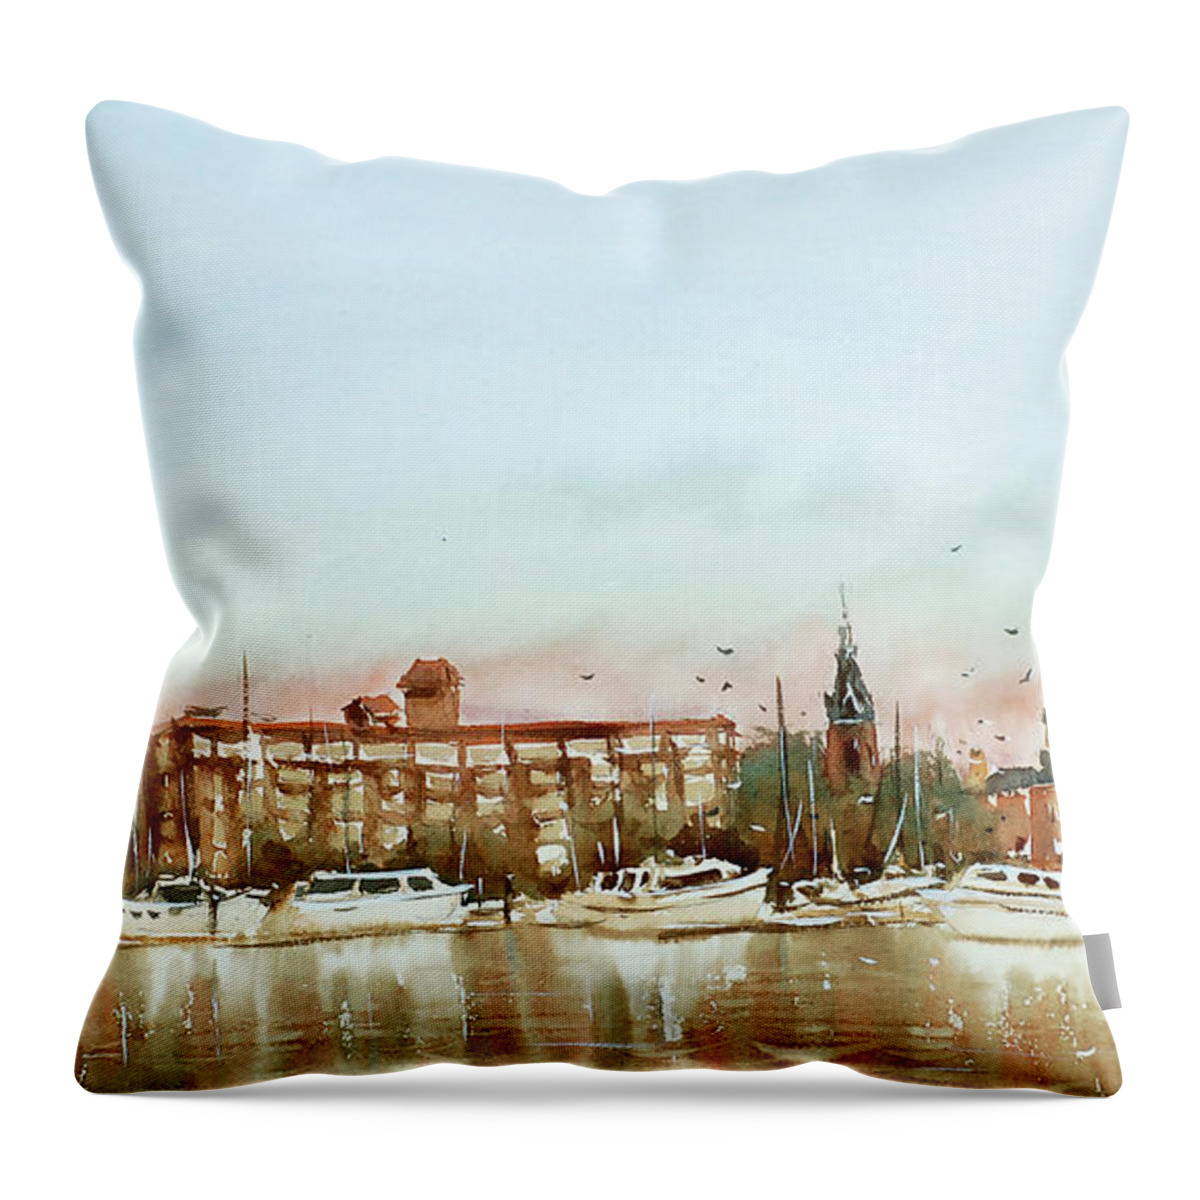 New Bern Throw Pillow featuring the painting New Bern Morning by Tesh Parekh